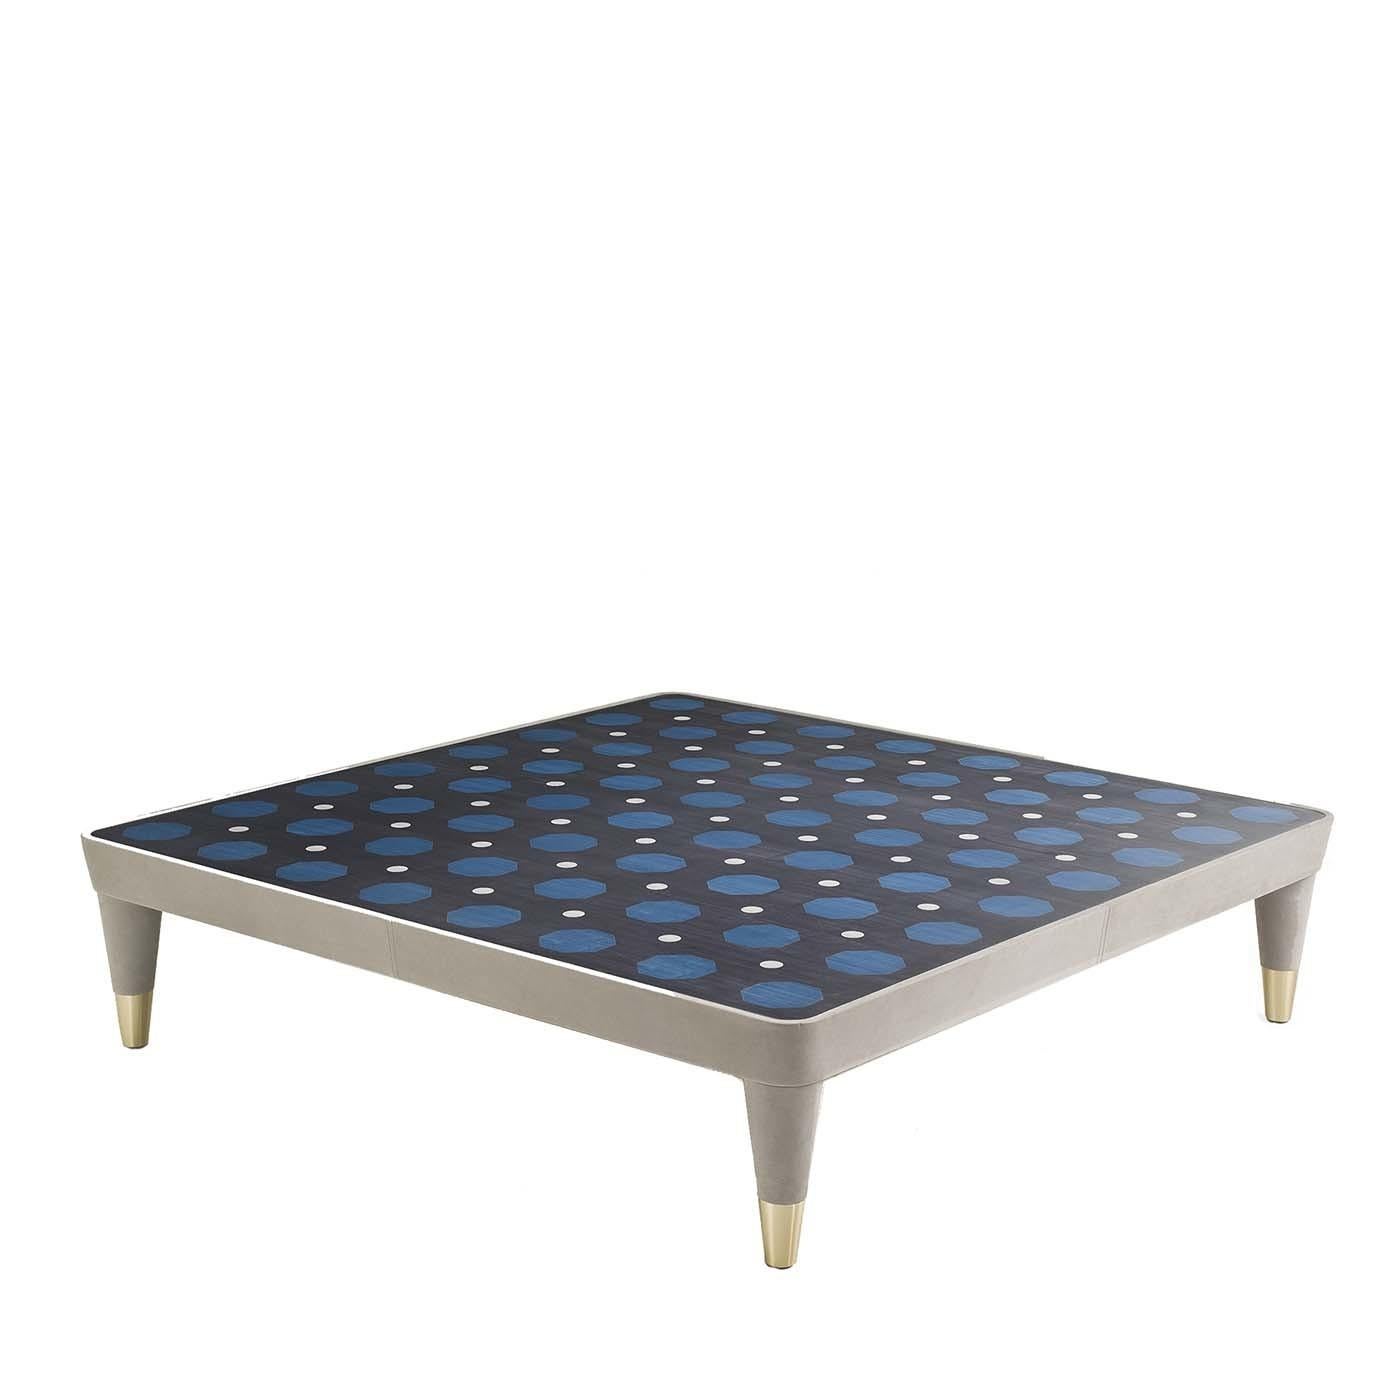 Part of the Century collection, this coffee table boasts midcentury proportions and patterned decorations that will make a statement in a modern decor. This piece has a strong visual impact, thanks to its stunning finishes. Nubuck leather covers its